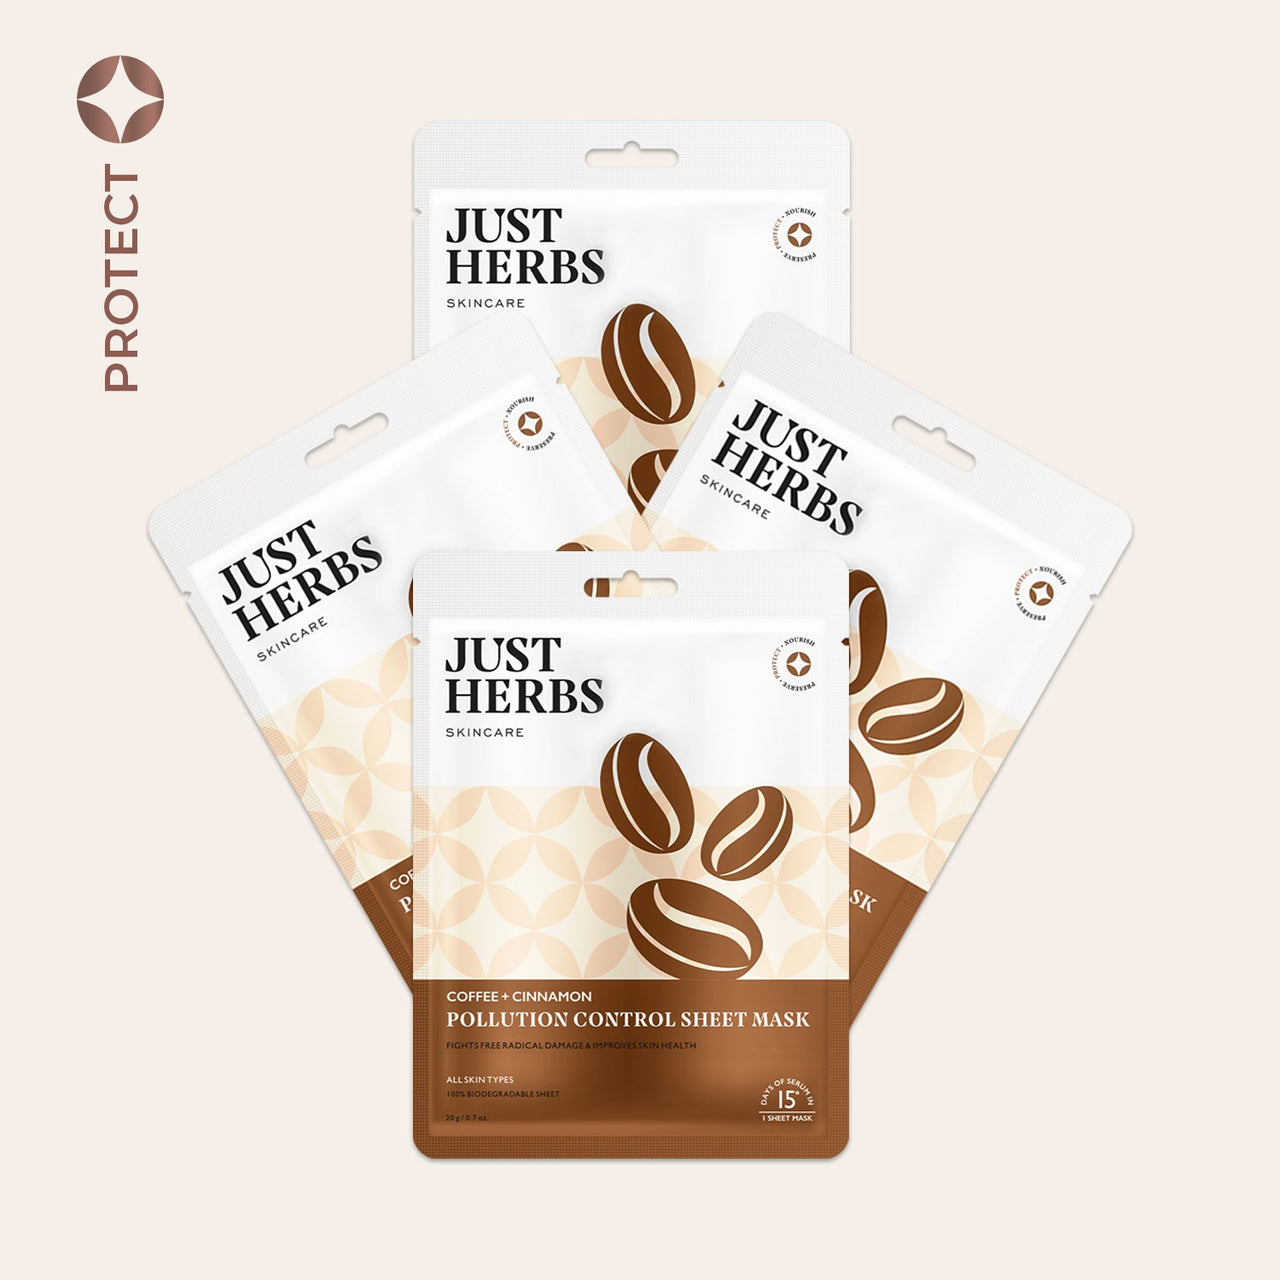 Coffee Sheet Mask with Cinnamon For Pollution Control - Pack of 4